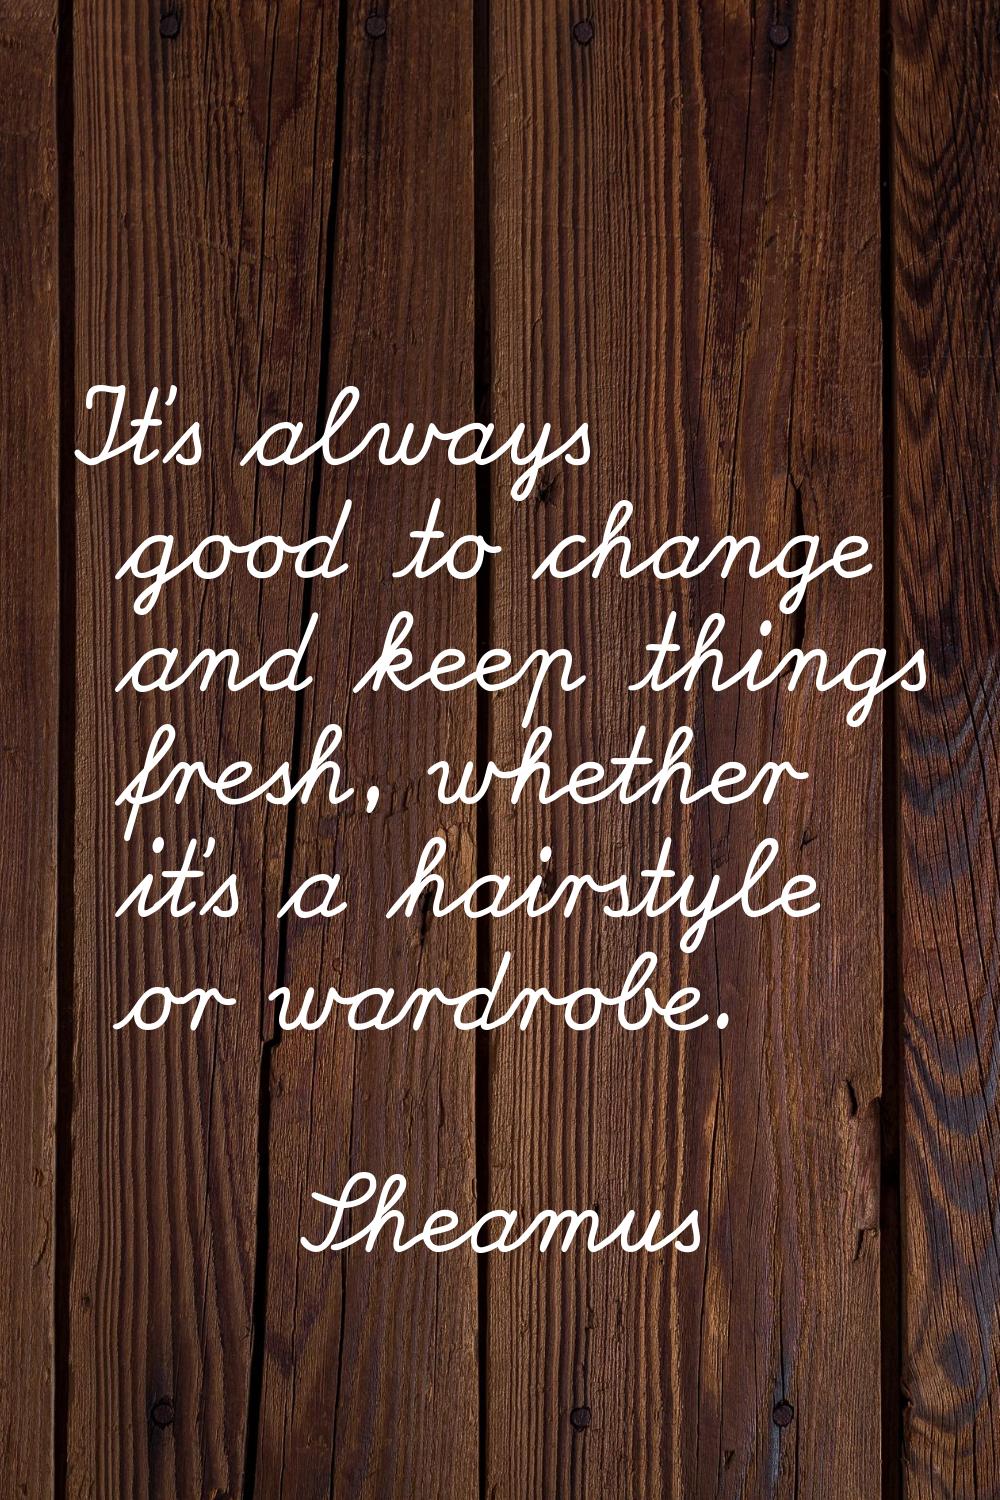 It's always good to change and keep things fresh, whether it's a hairstyle or wardrobe.